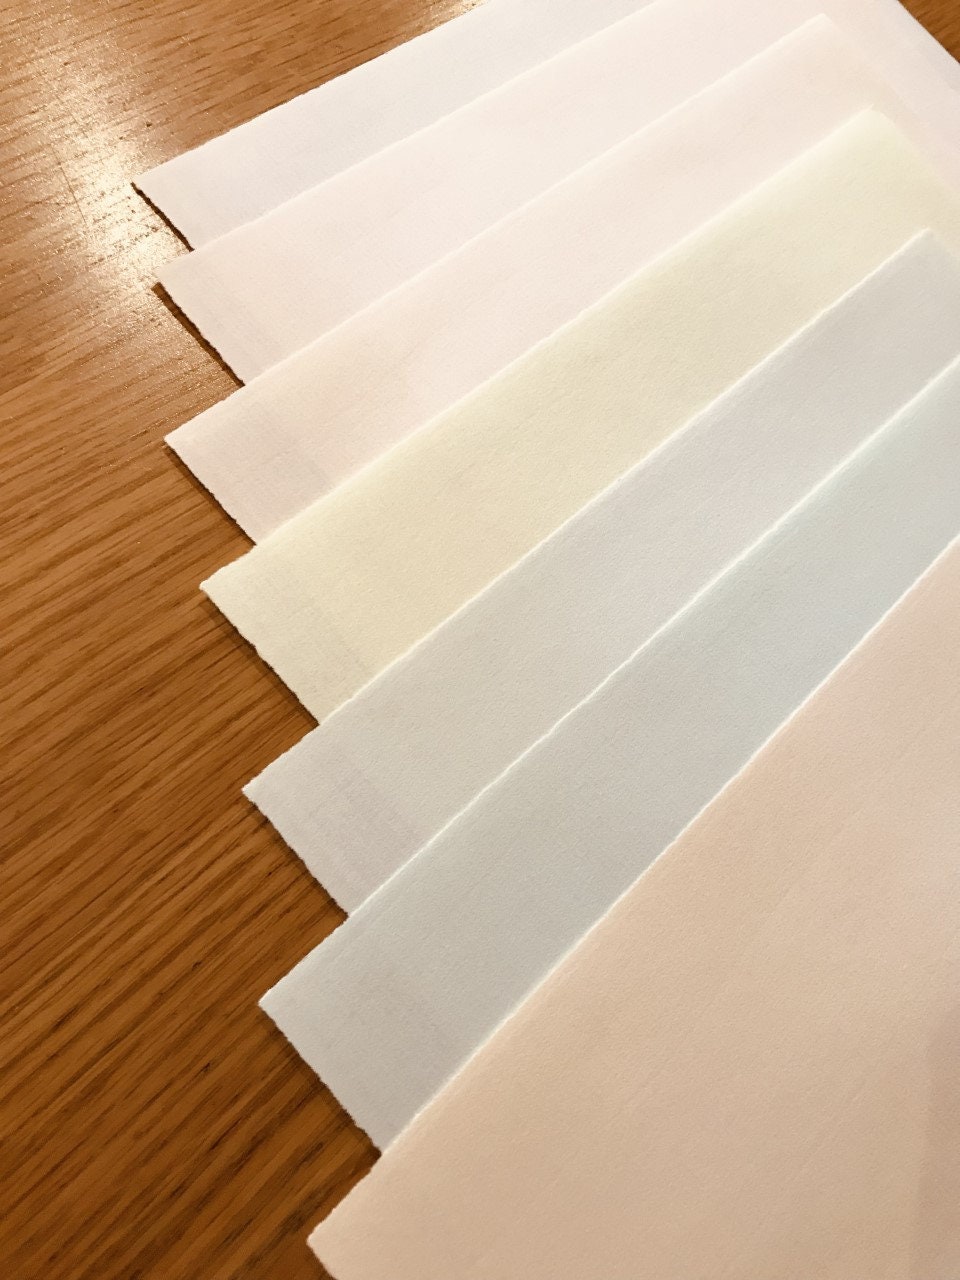 Vintage Classic Laid Watermarked Heavy Weight Typing Paper Set of 5 Sheets  